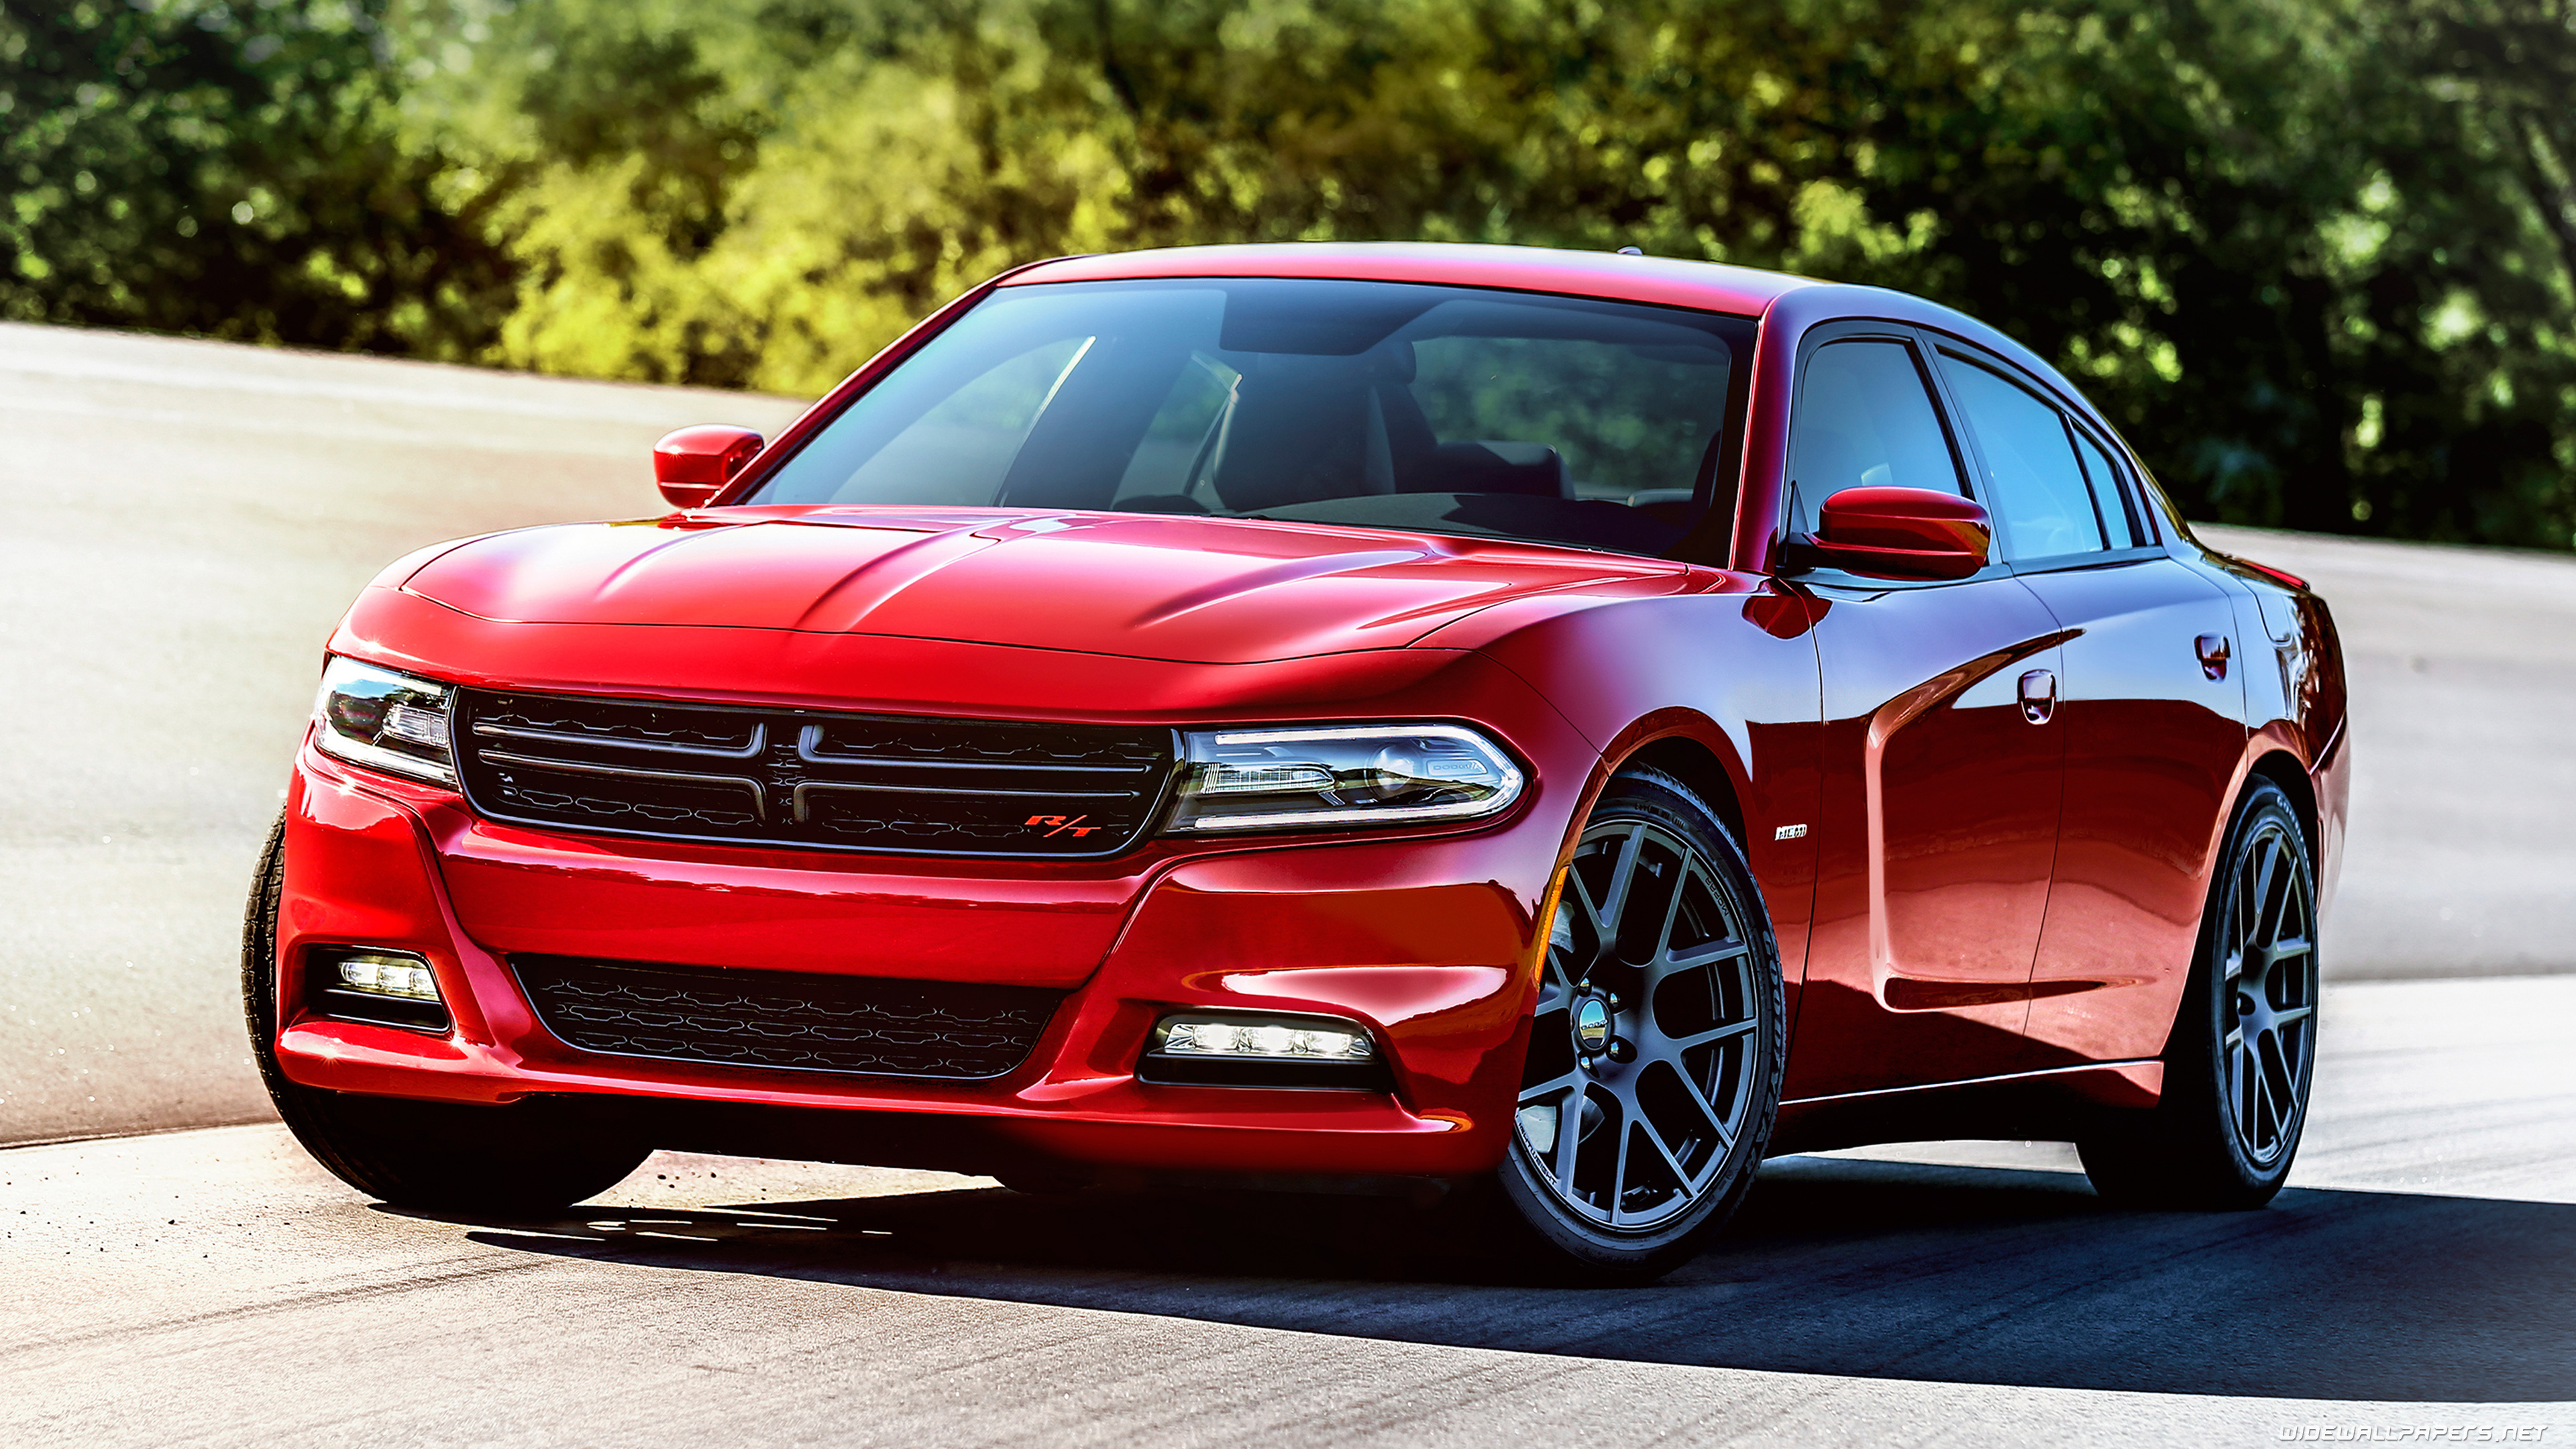 Dodge Charger, Muscle car, 4K Ultra HD wallpapers, Iconic design, 3840x2160 4K Desktop